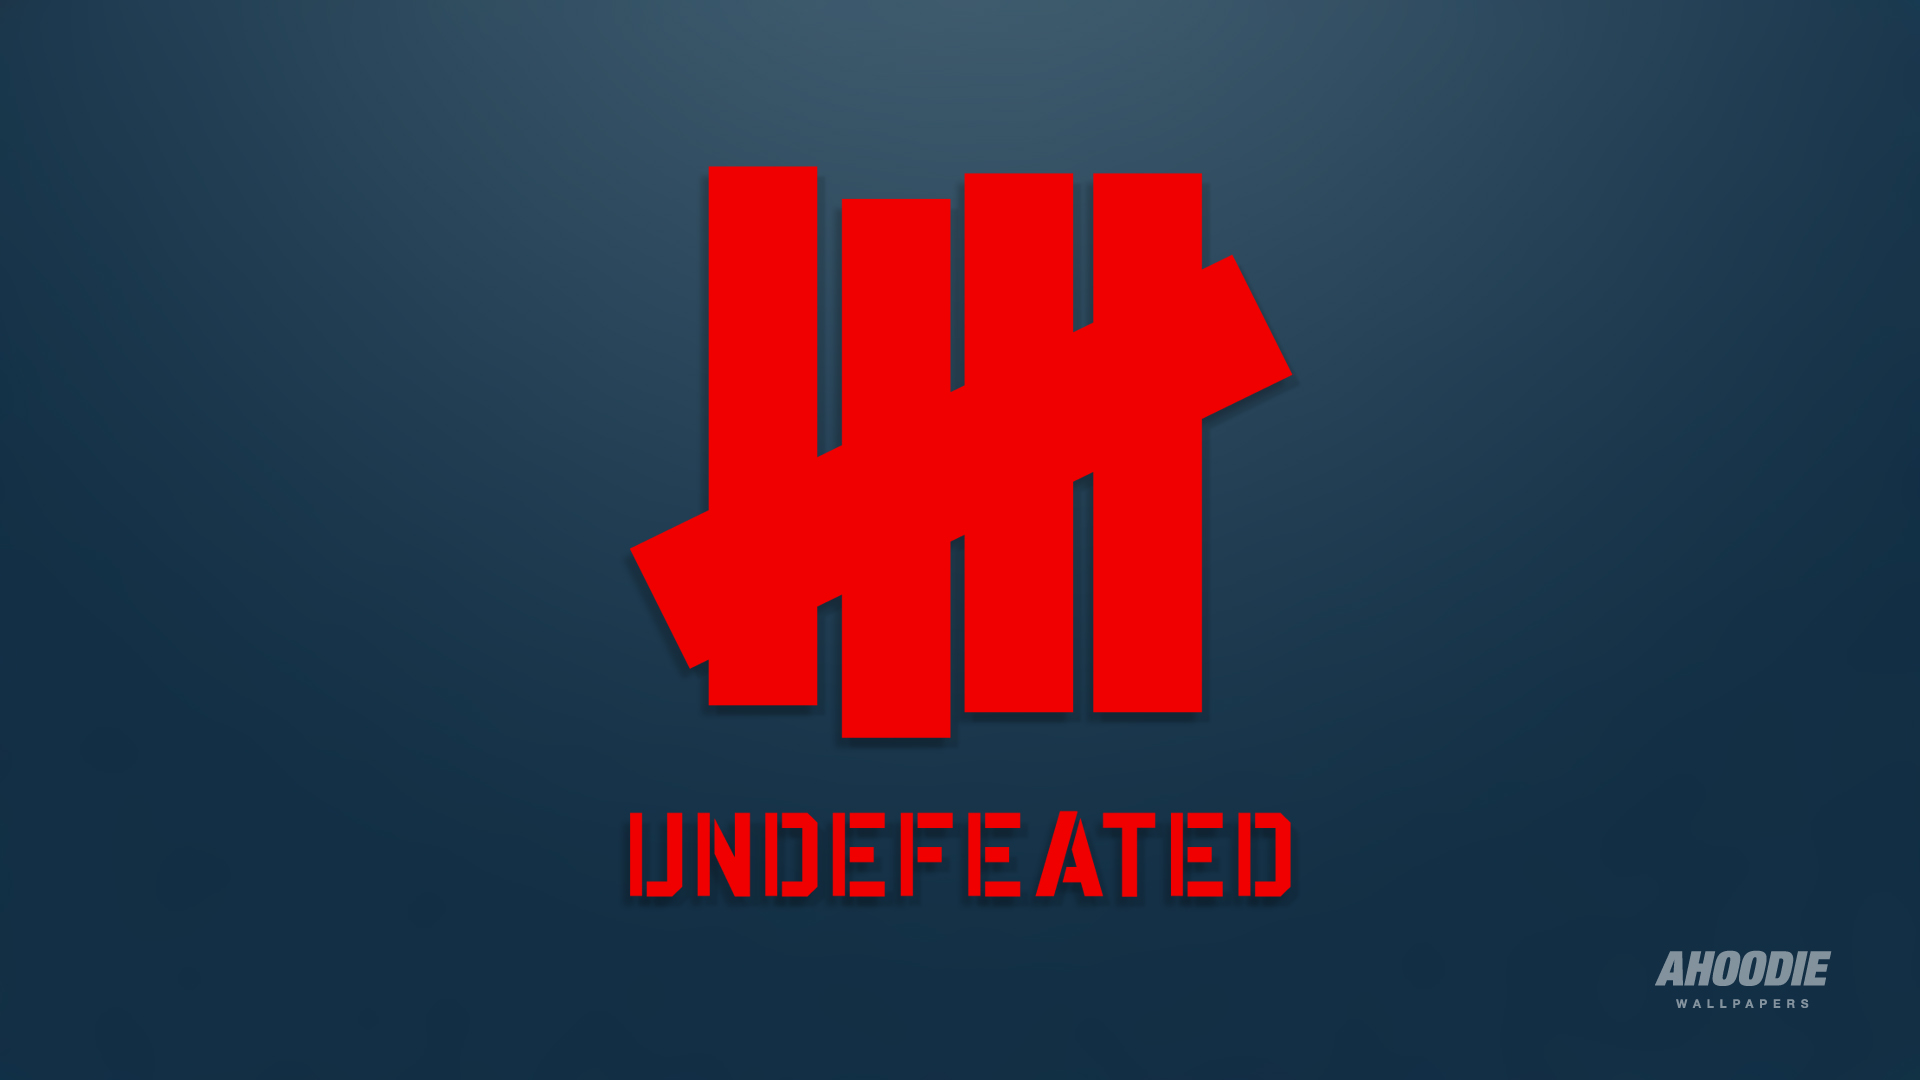 Undefeated Wallpaper HD Wallpapers on picsfair.com